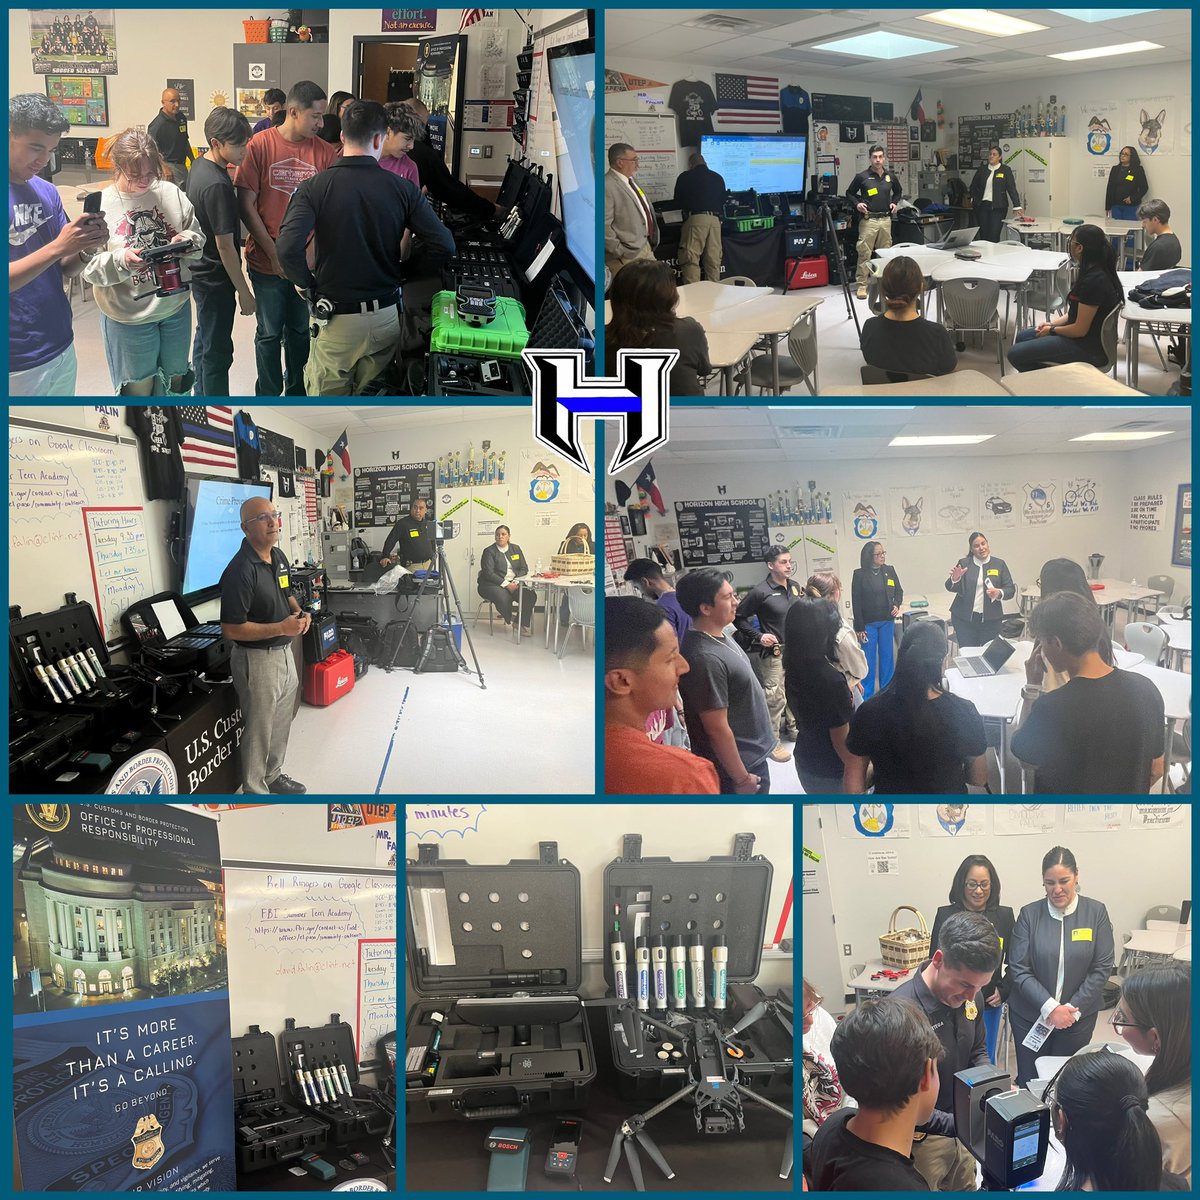 Thank you to the U.S. Customs and Border Protection and UTEP PD for the presentations today for the HHS Practicum in Law class. Students were given vital information on what is required for the job. STING ‘Em! #WeAreClintISD #ReptheH #ScorpionStrong #ClintISD100 #LawEnforcement